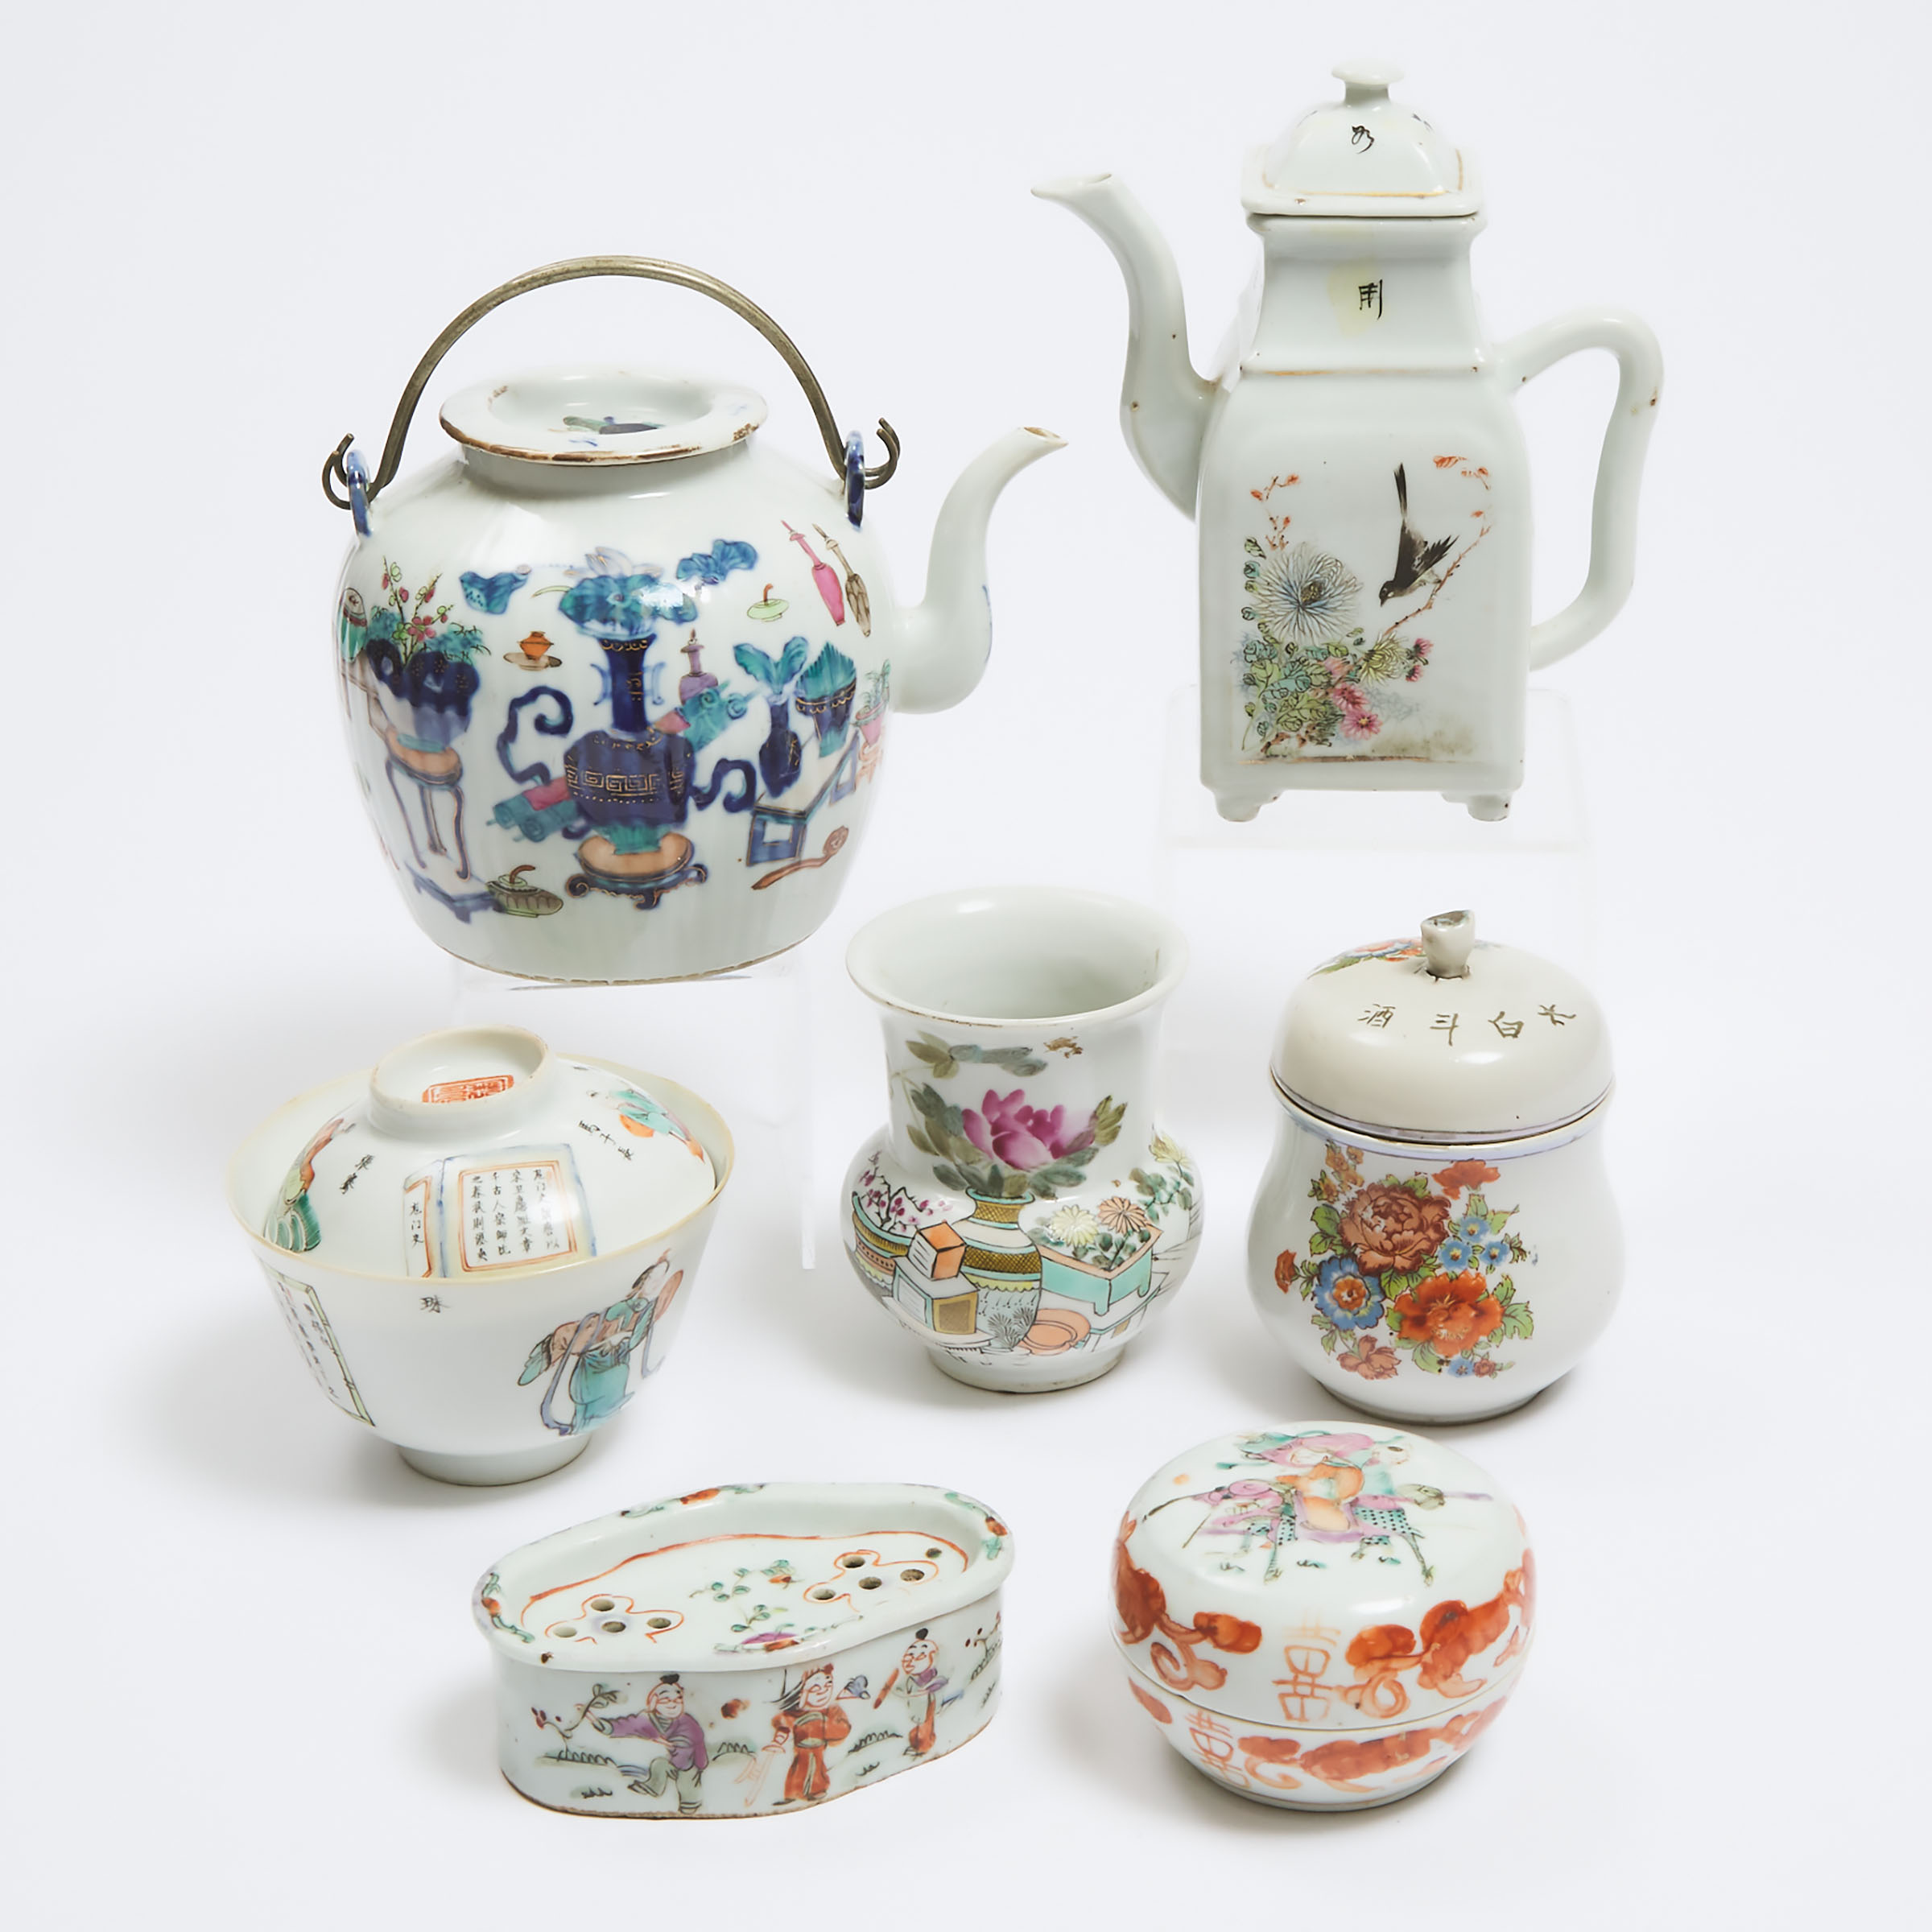 A Group of Seven Famille Rose Wares, Late 19th/Early 20th Century 